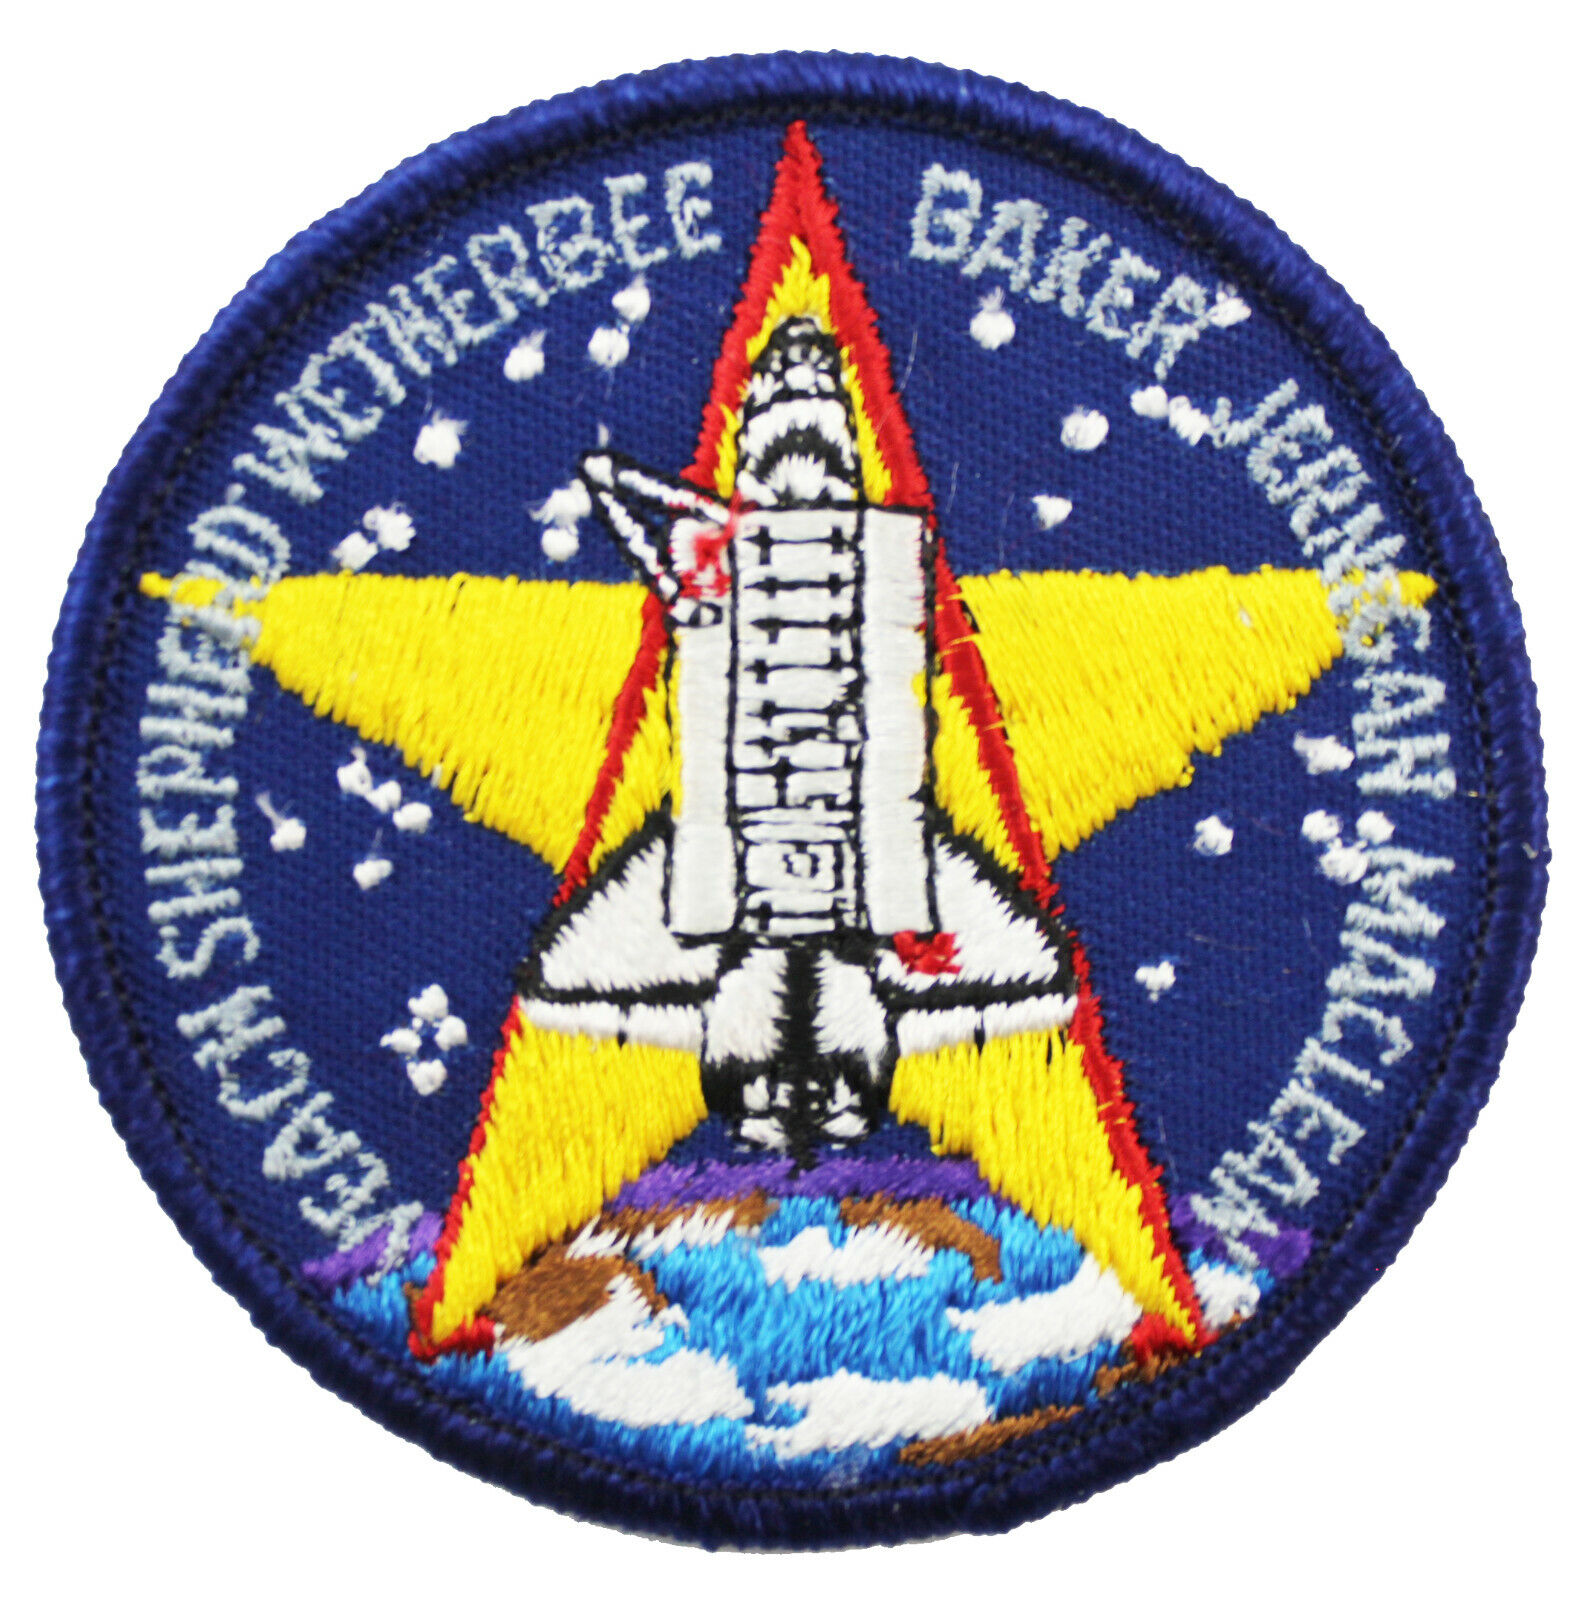 STS-52 NASA Shuttle Mission Flight Astronaut Crew Space Patch